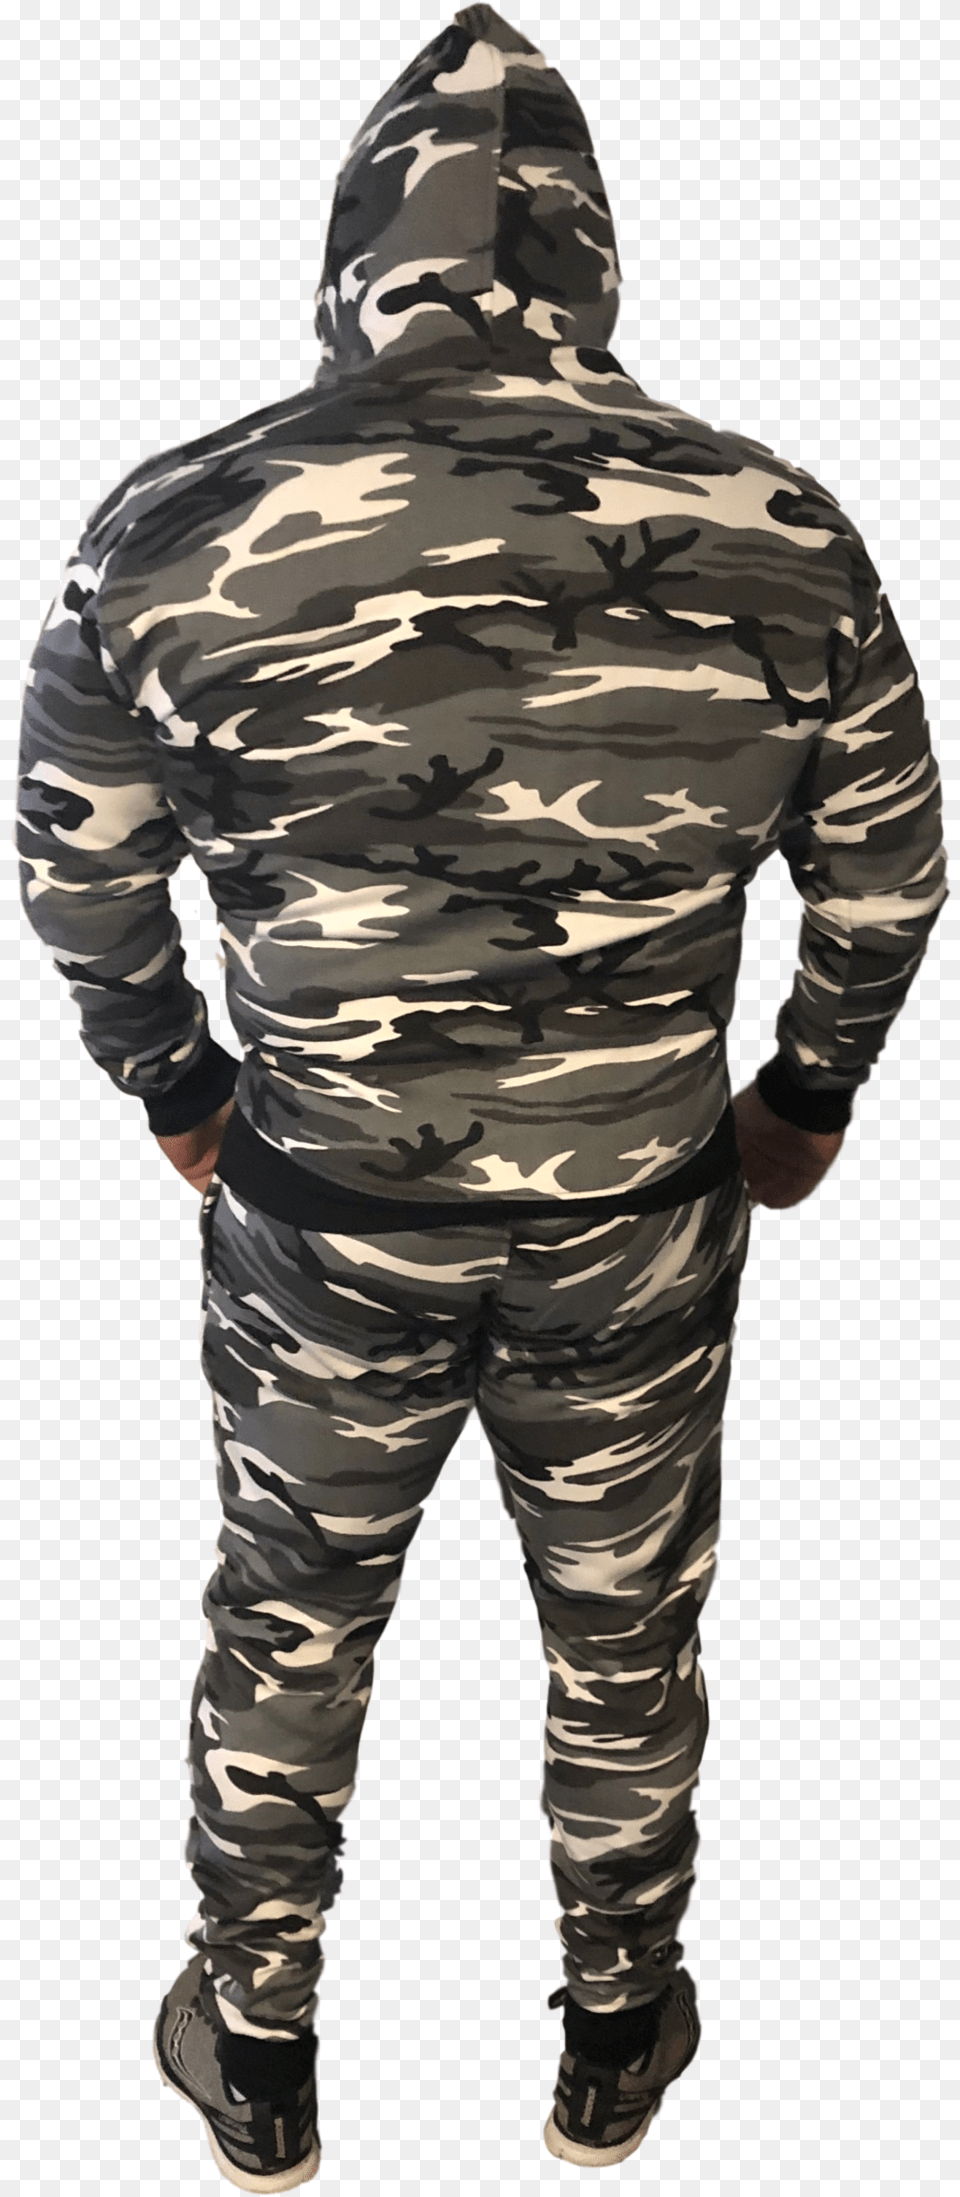 Camo Track Suit Back, Military Uniform, Military, Adult, Person Png Image